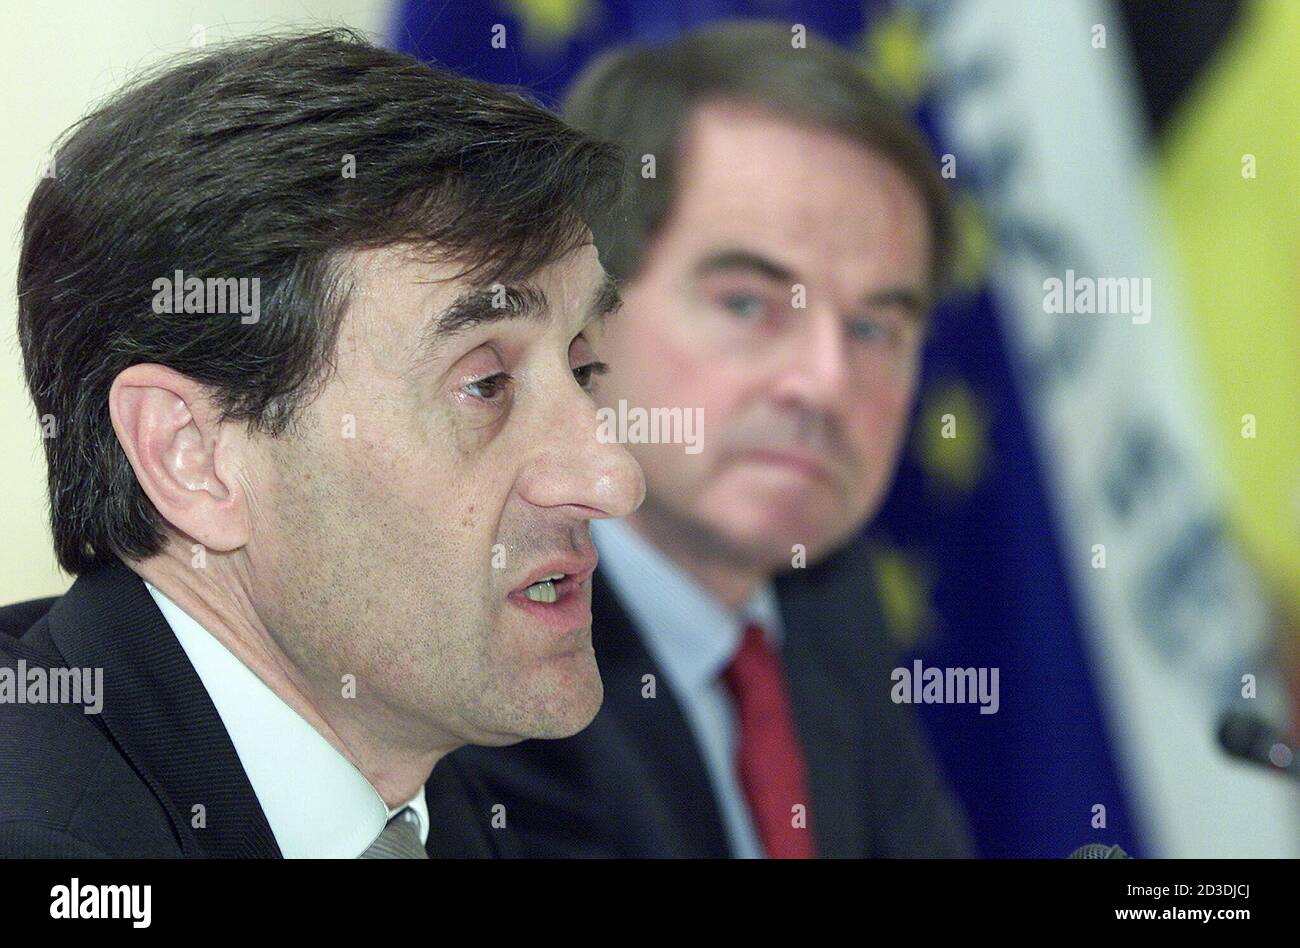 PRESIDENT OF THE BELGIAN EMPLOYERS FEDERATION VANSTEENKISTE AND CEO VANDEPUTTE HOLD A NEWS CONFERENCE IN BRUSSELS.  Newly appointed President of the Belgian Employers Federation FEB/VBO Luc Vansteenkiste (L) and his Chief Executive Officer Tony Vandeputte (R) hold a joint news conference in Brussels, April 25, 2002. Vansteenkiste, managing director of Recticel, will head the federation until 2005. REUTERS/Francois Lenoir REUTERS Stock Photo